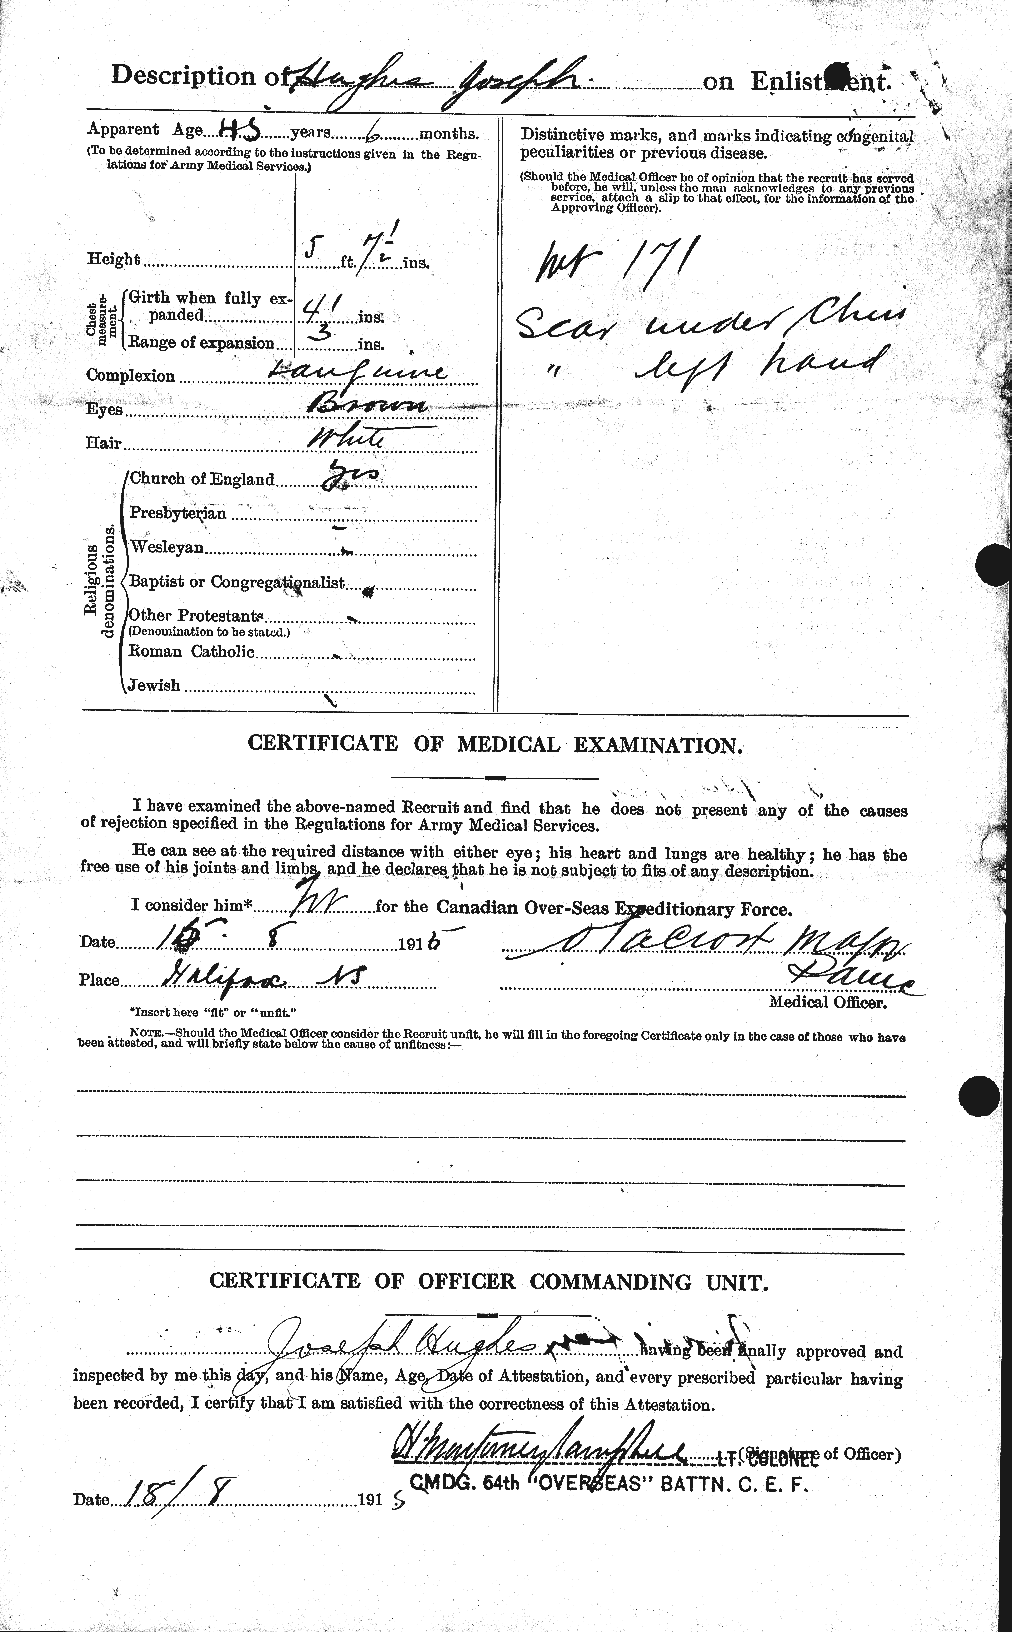 Personnel Records of the First World War - CEF 404076b